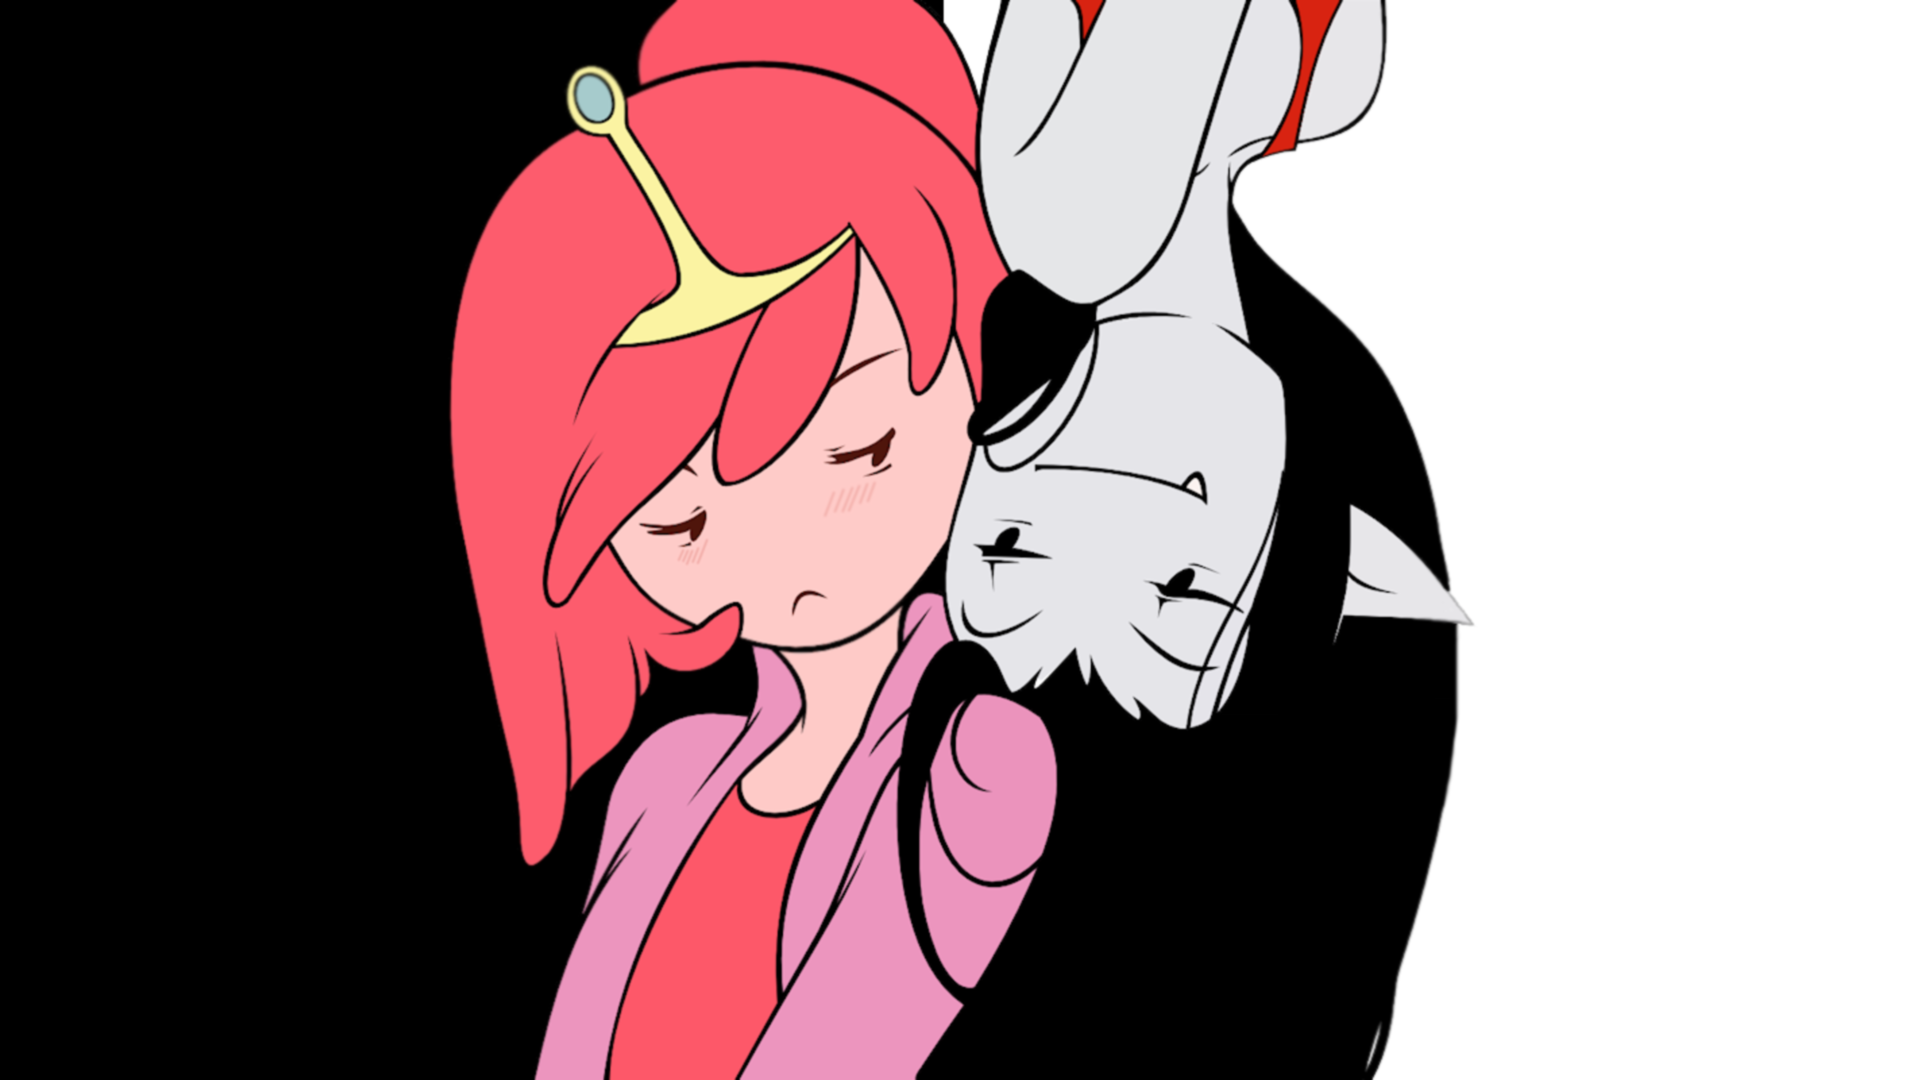 General 1920x1080 Marceline the vampire queen Princess Bubblegum Yin and Yang TV series two tone pointy ears frown Adventure Time closed mouth smiling digital art minimalism upside down crown cartoon Cartoon Network pink hair black hair jacket face to face